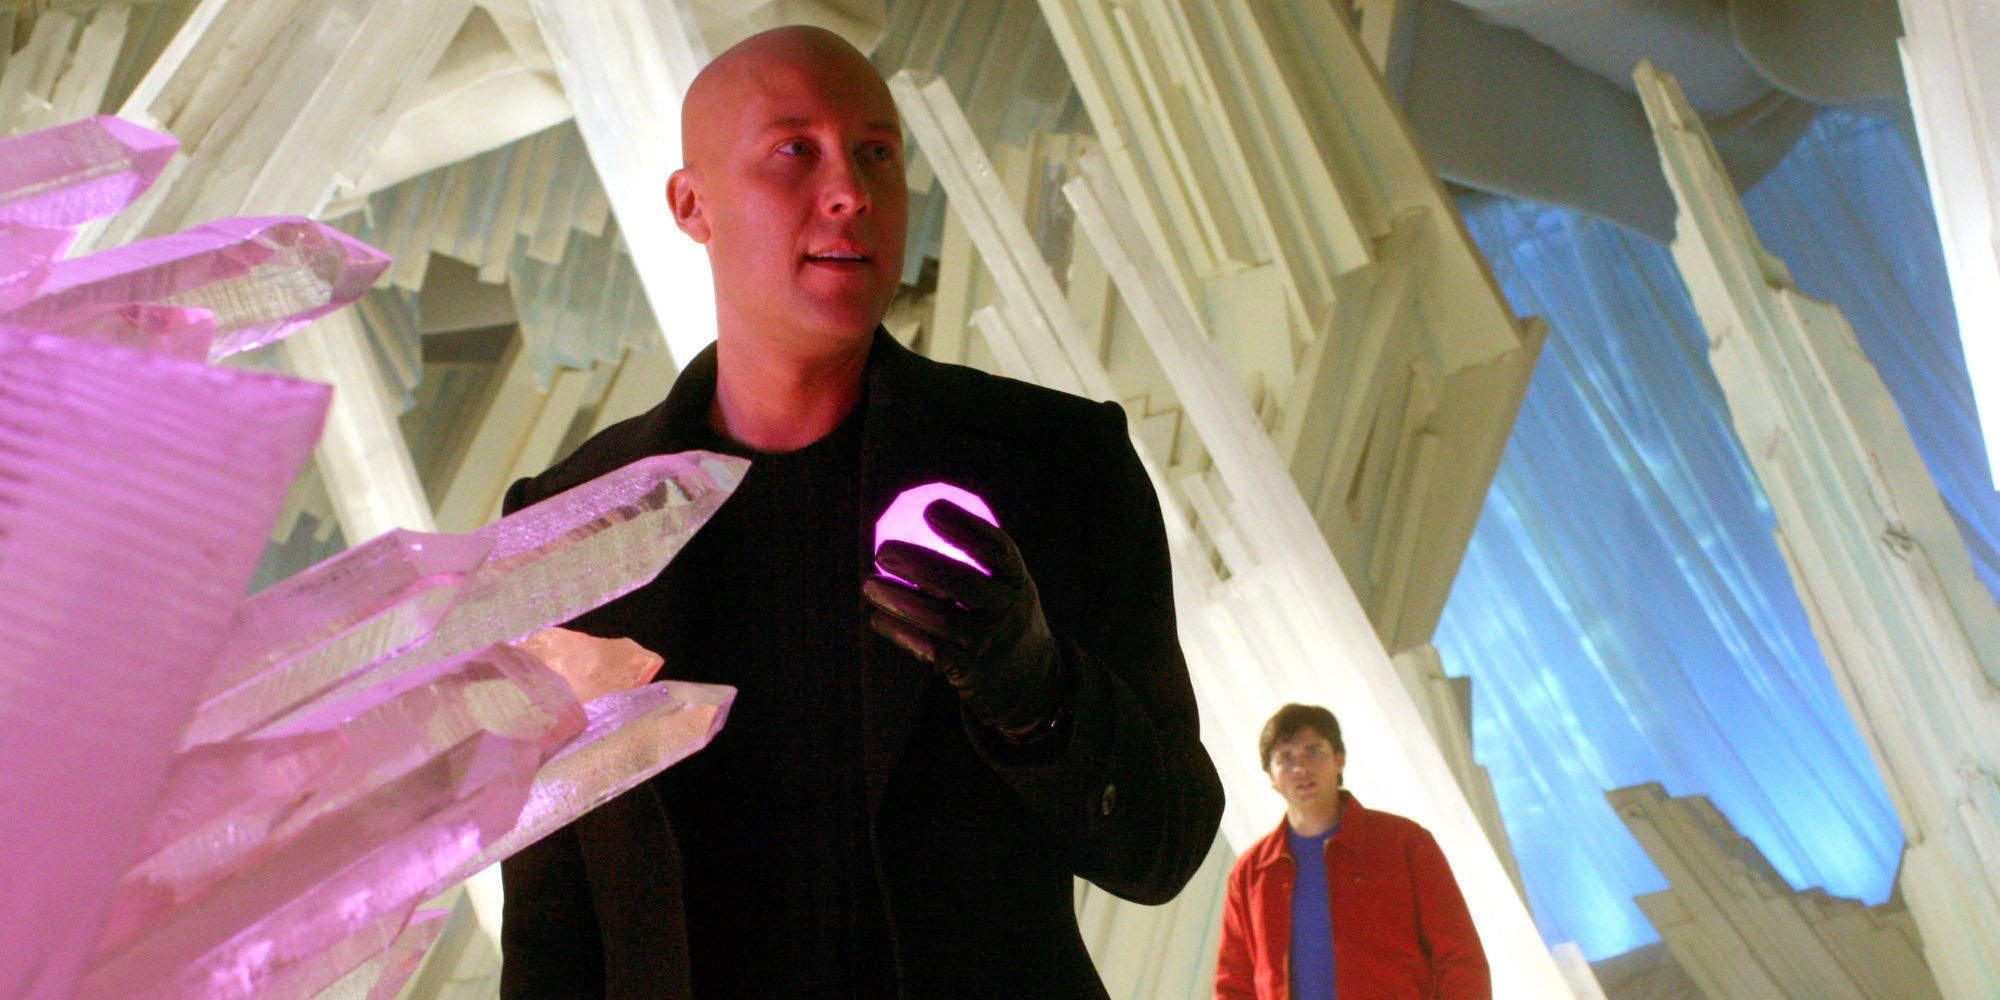 Lex Luthor explores the Fortress of Solitude in Smallville